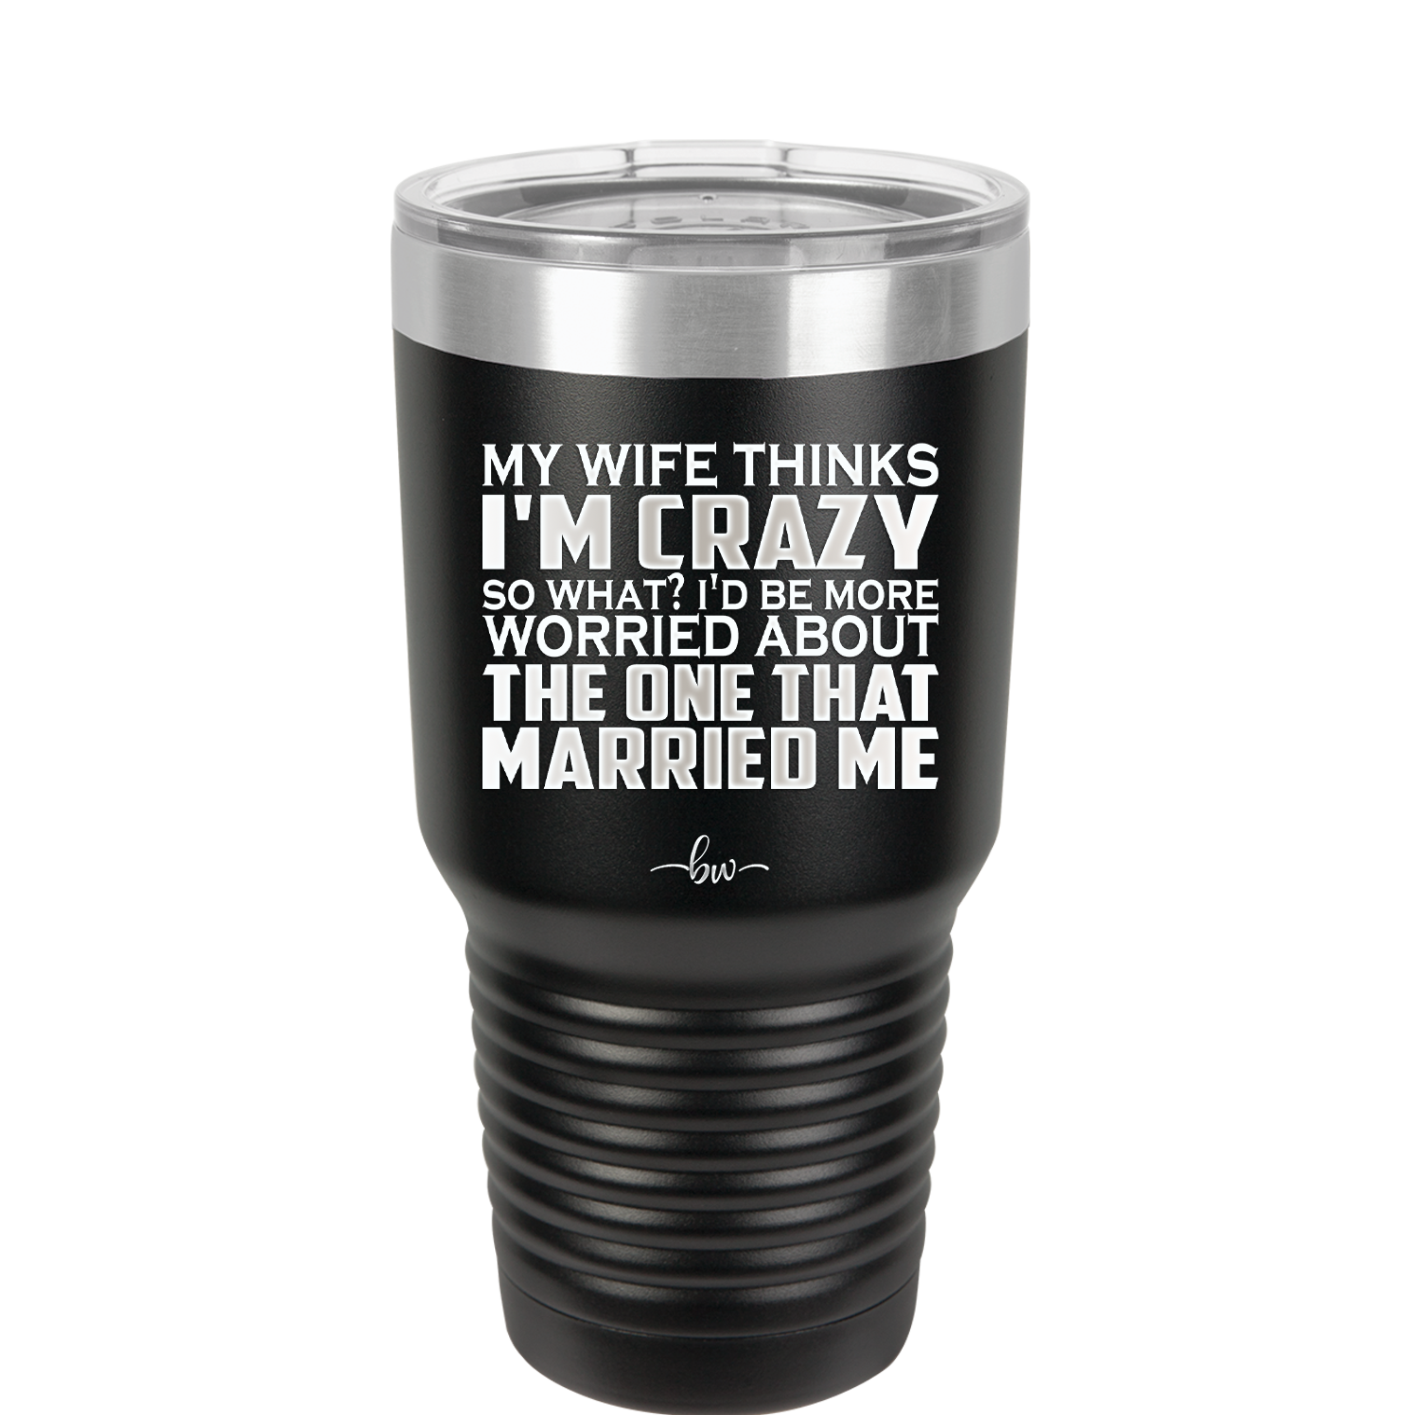 My Wife Thinks I'm Crazy I'd Be More Worried About the One That Married Me - Laser Engraved Stainless Steel Drinkware - 2229 -